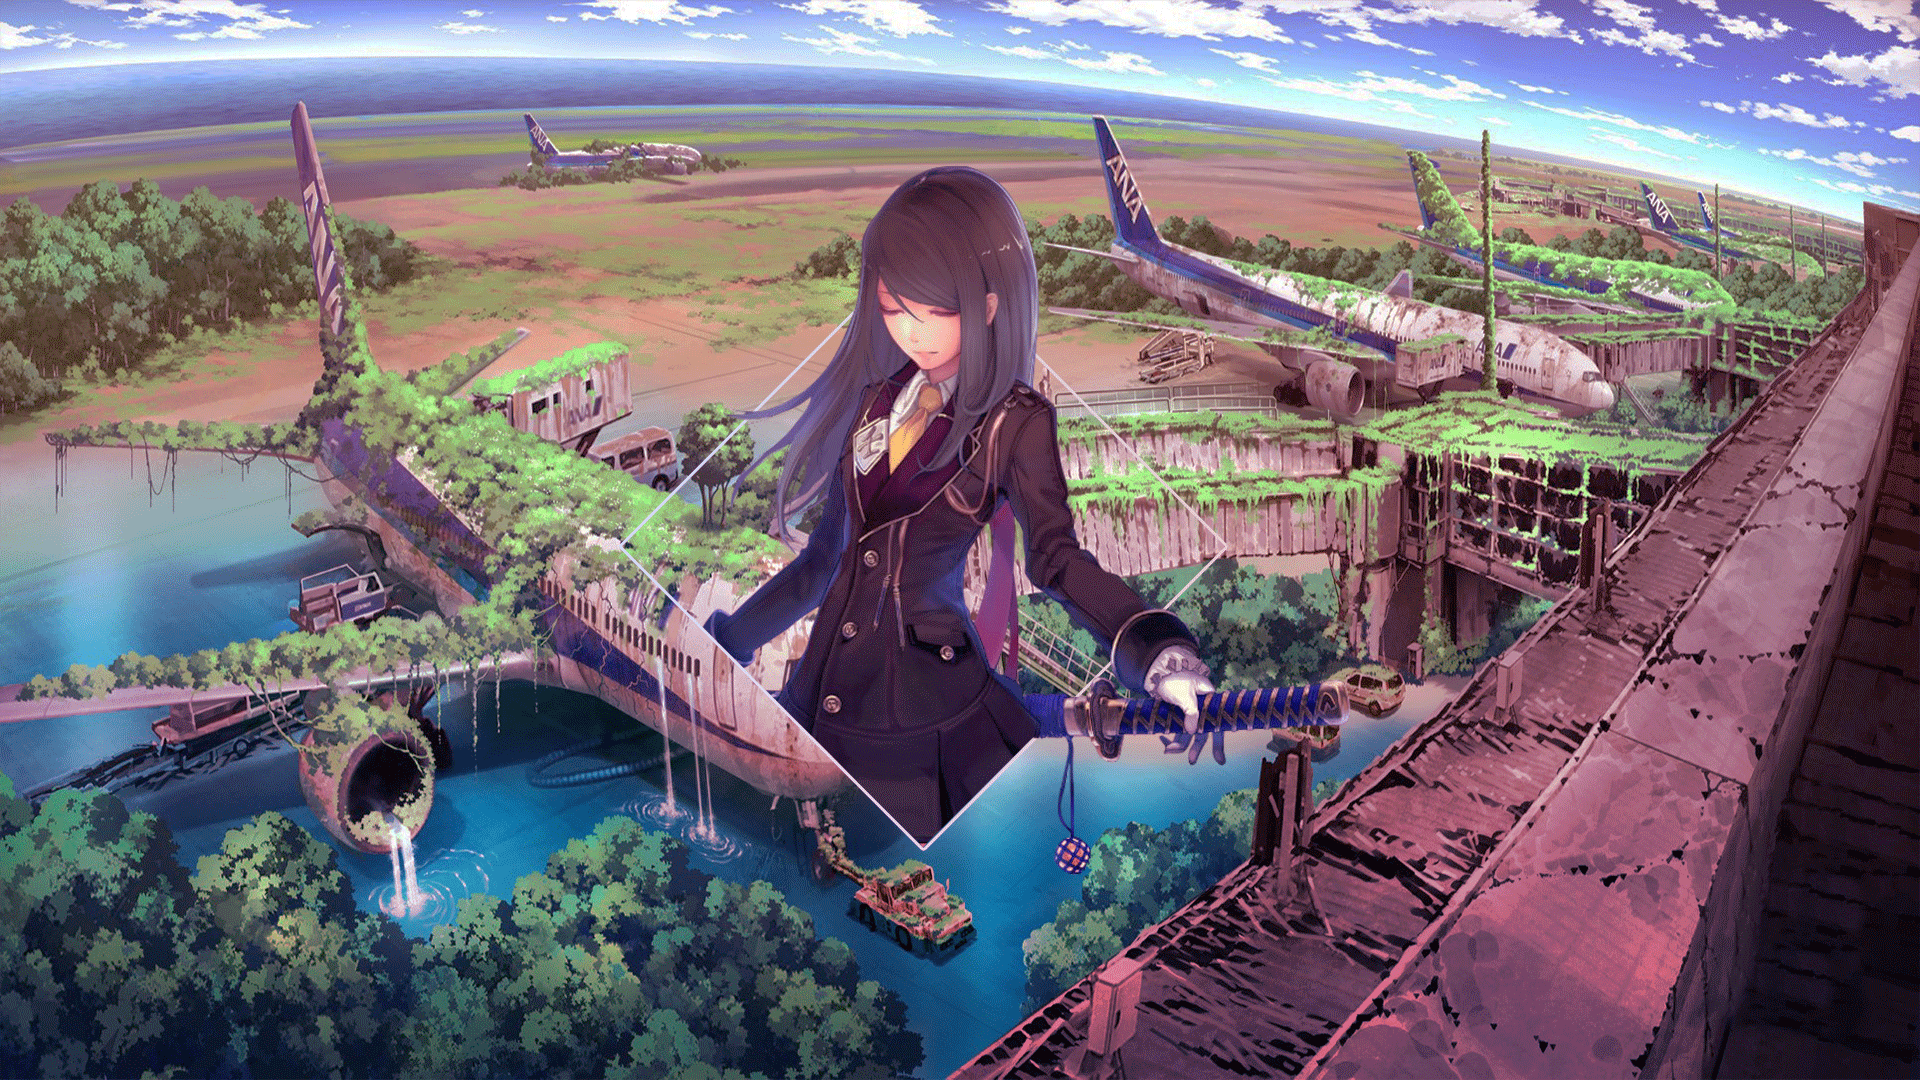 Anime Anime Girls Anime Landscape Katana Airplane Photoshop Digital Art Picture In Picture Piture In 1920x1080